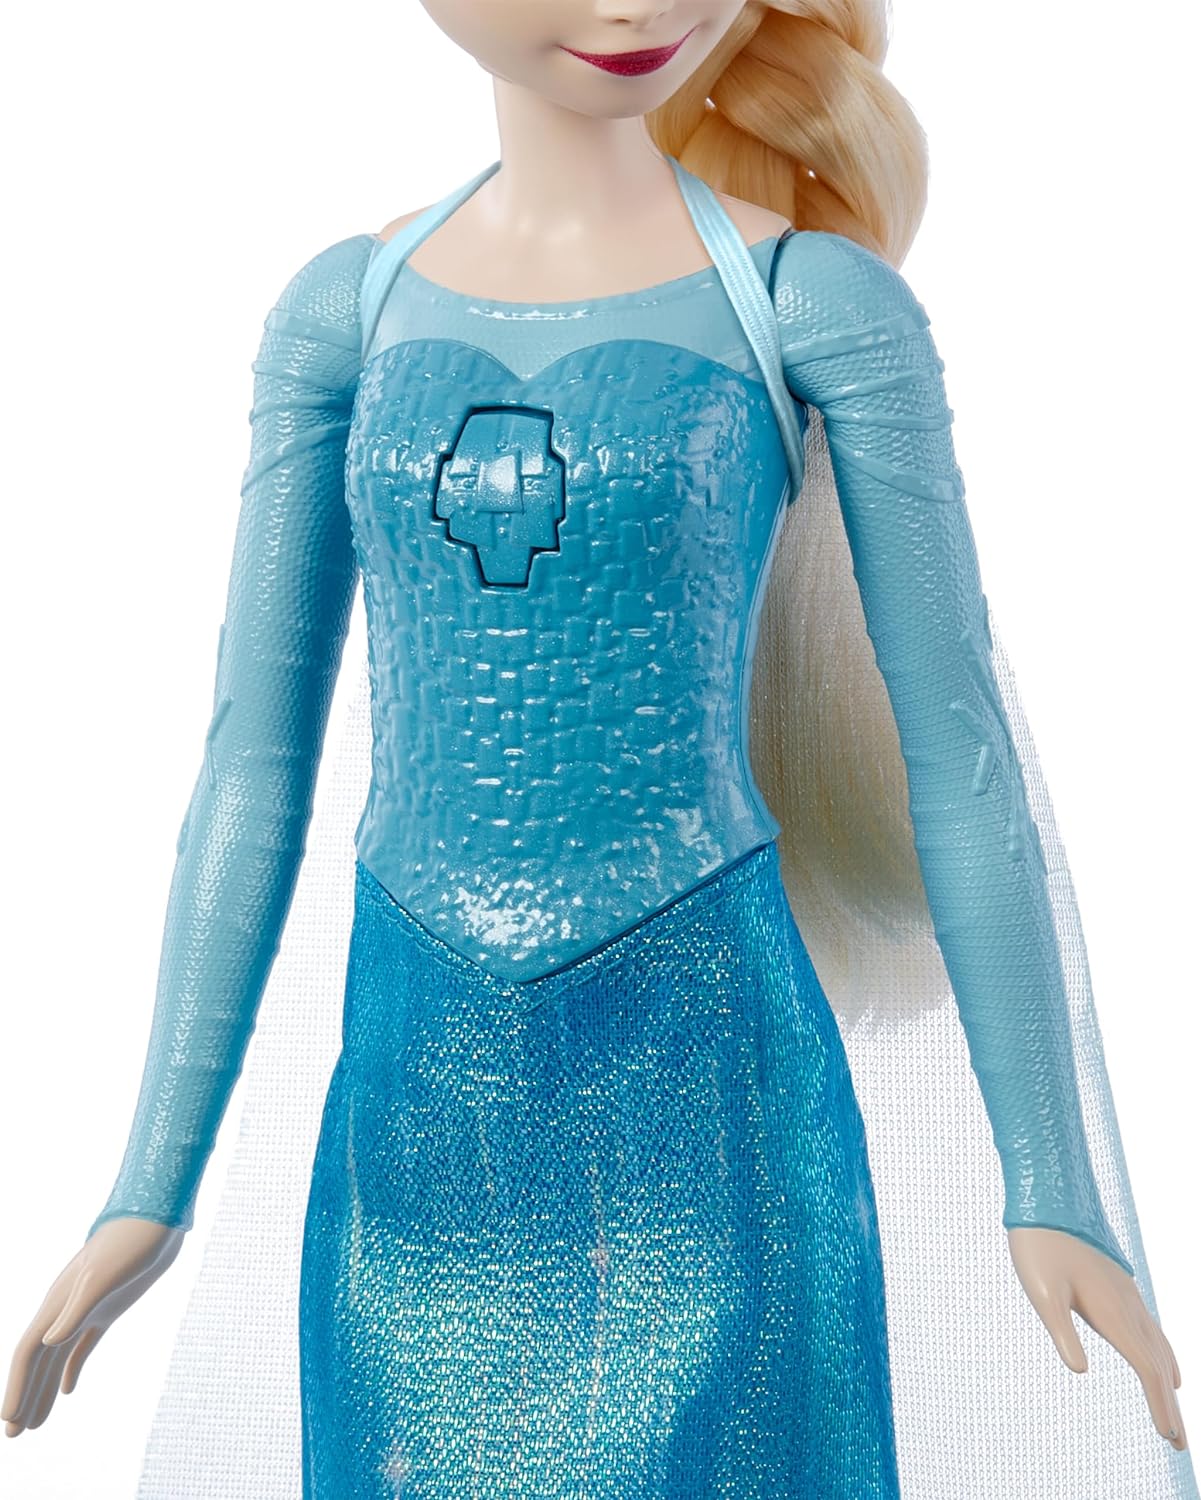 You are currently viewing Singing Elsa Doll Review